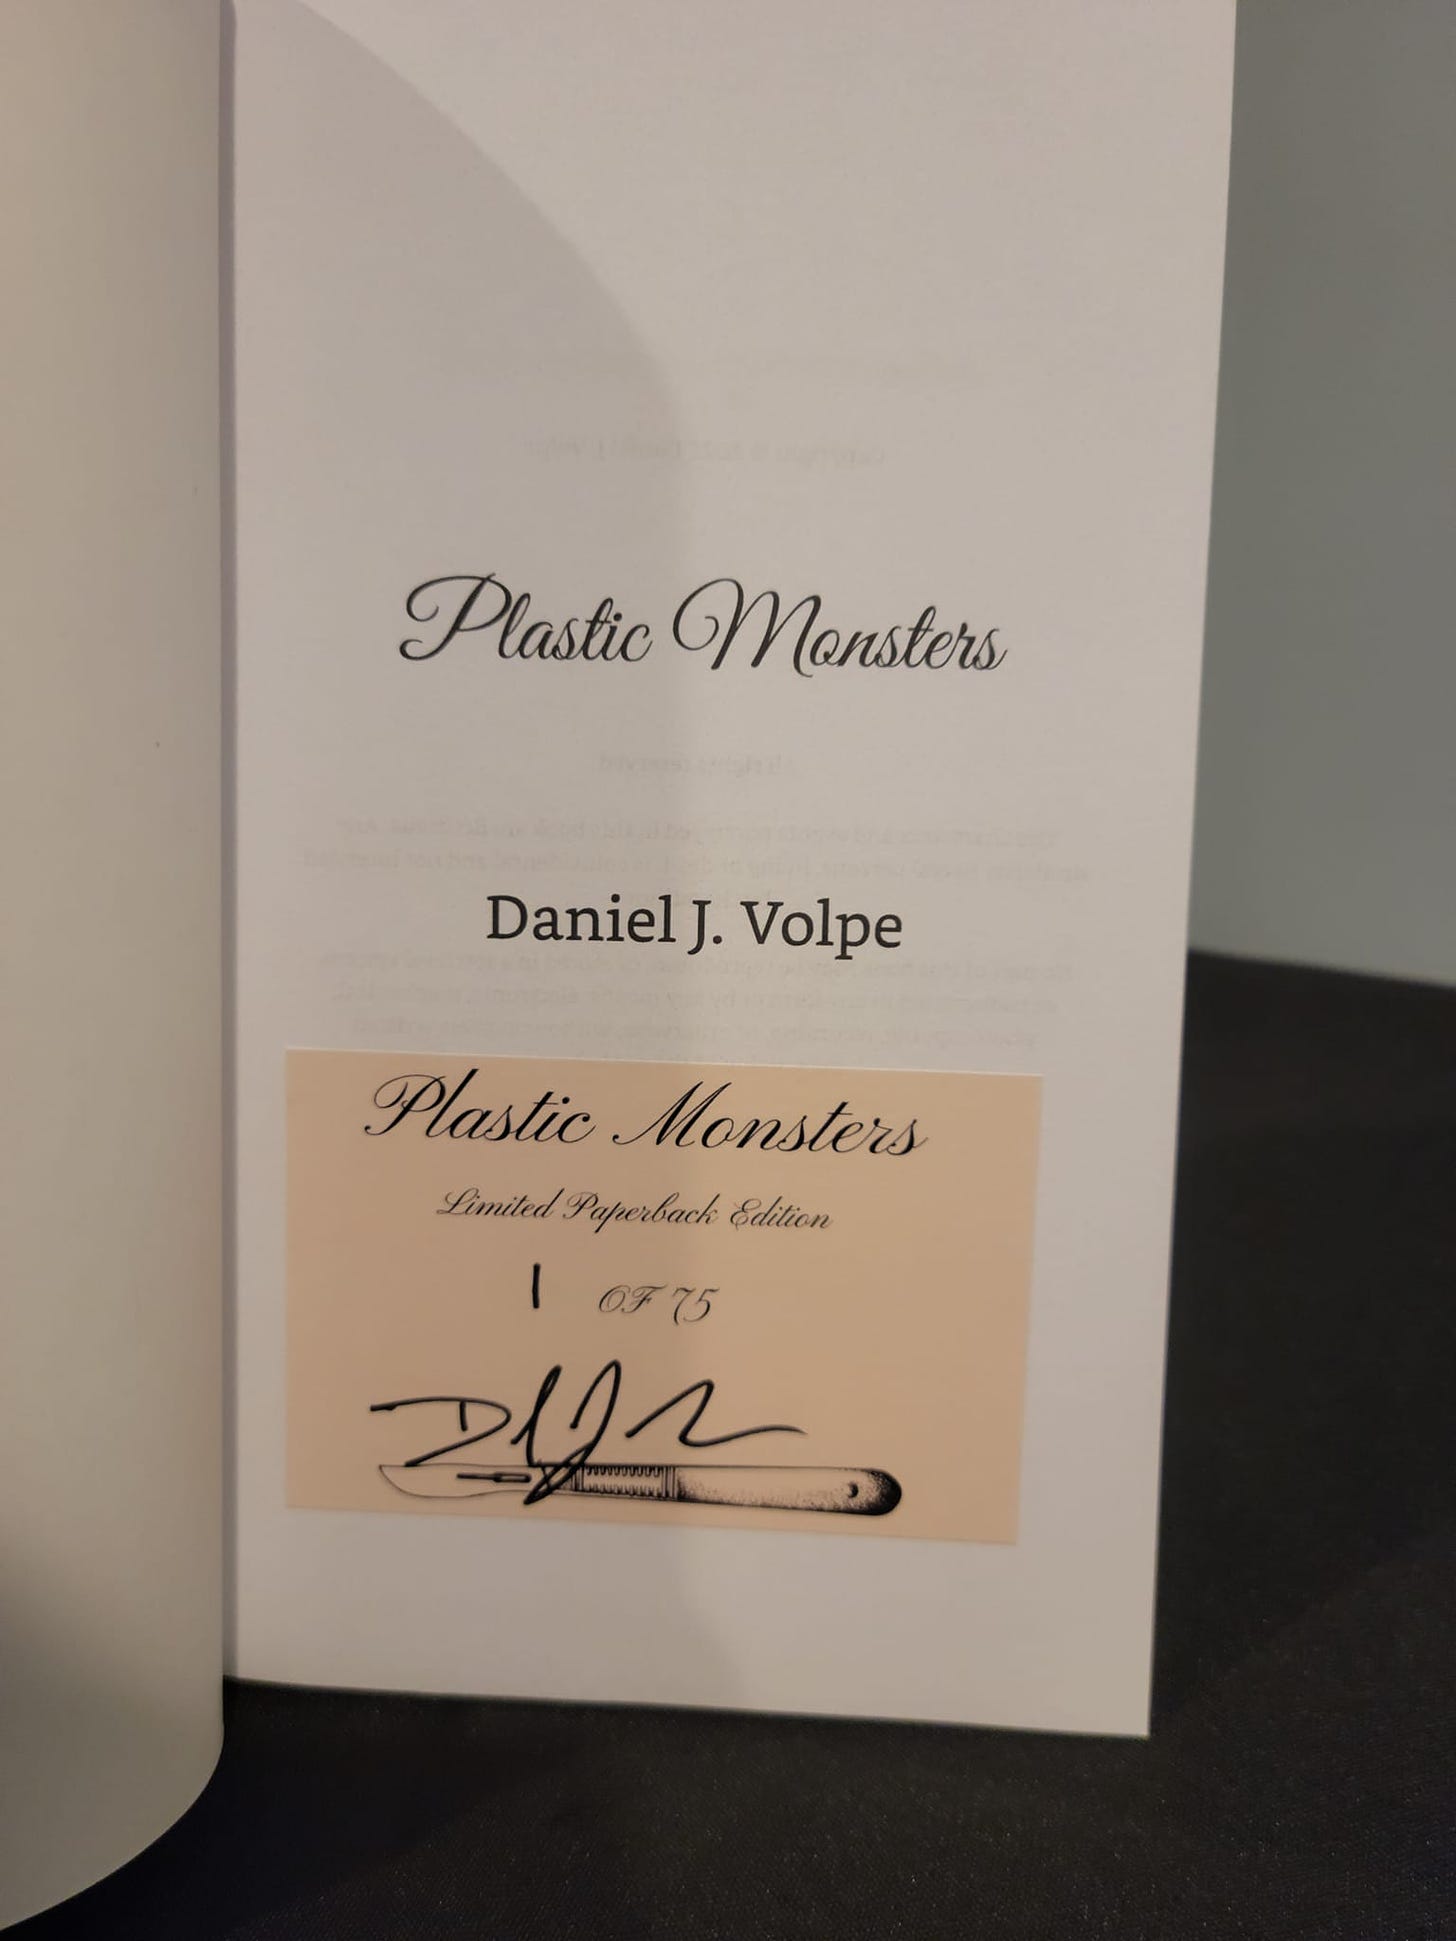 May be an image of text that says 'Plastic Monsters DanielJ. Volpe Plastic Monsters Limited Paperbck Edition I 0775 zழா'